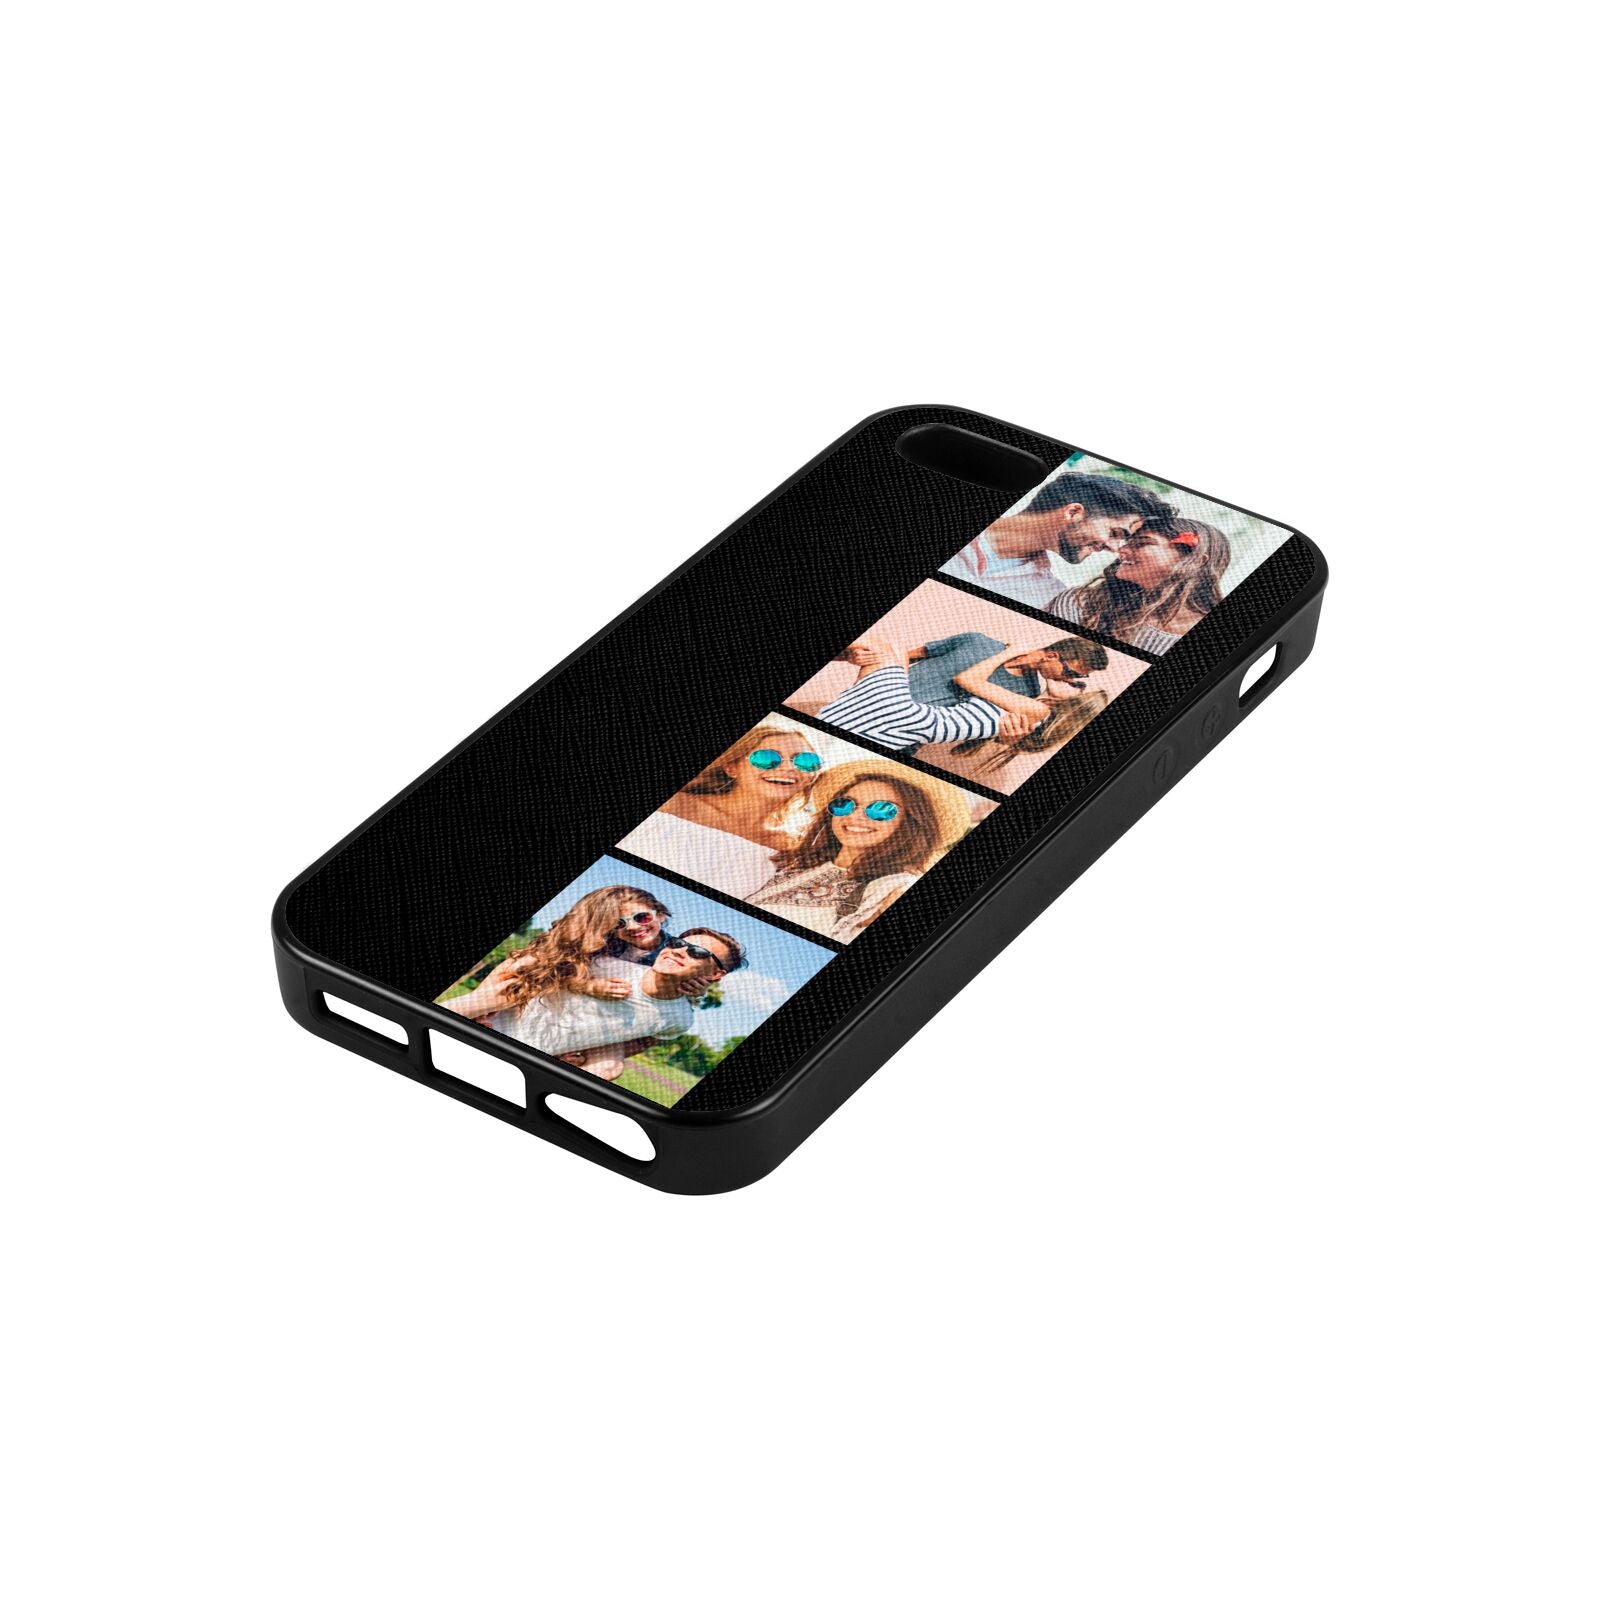 Photo Strip Montage Upload Black Saffiano Leather iPhone 5 Case Side Angle